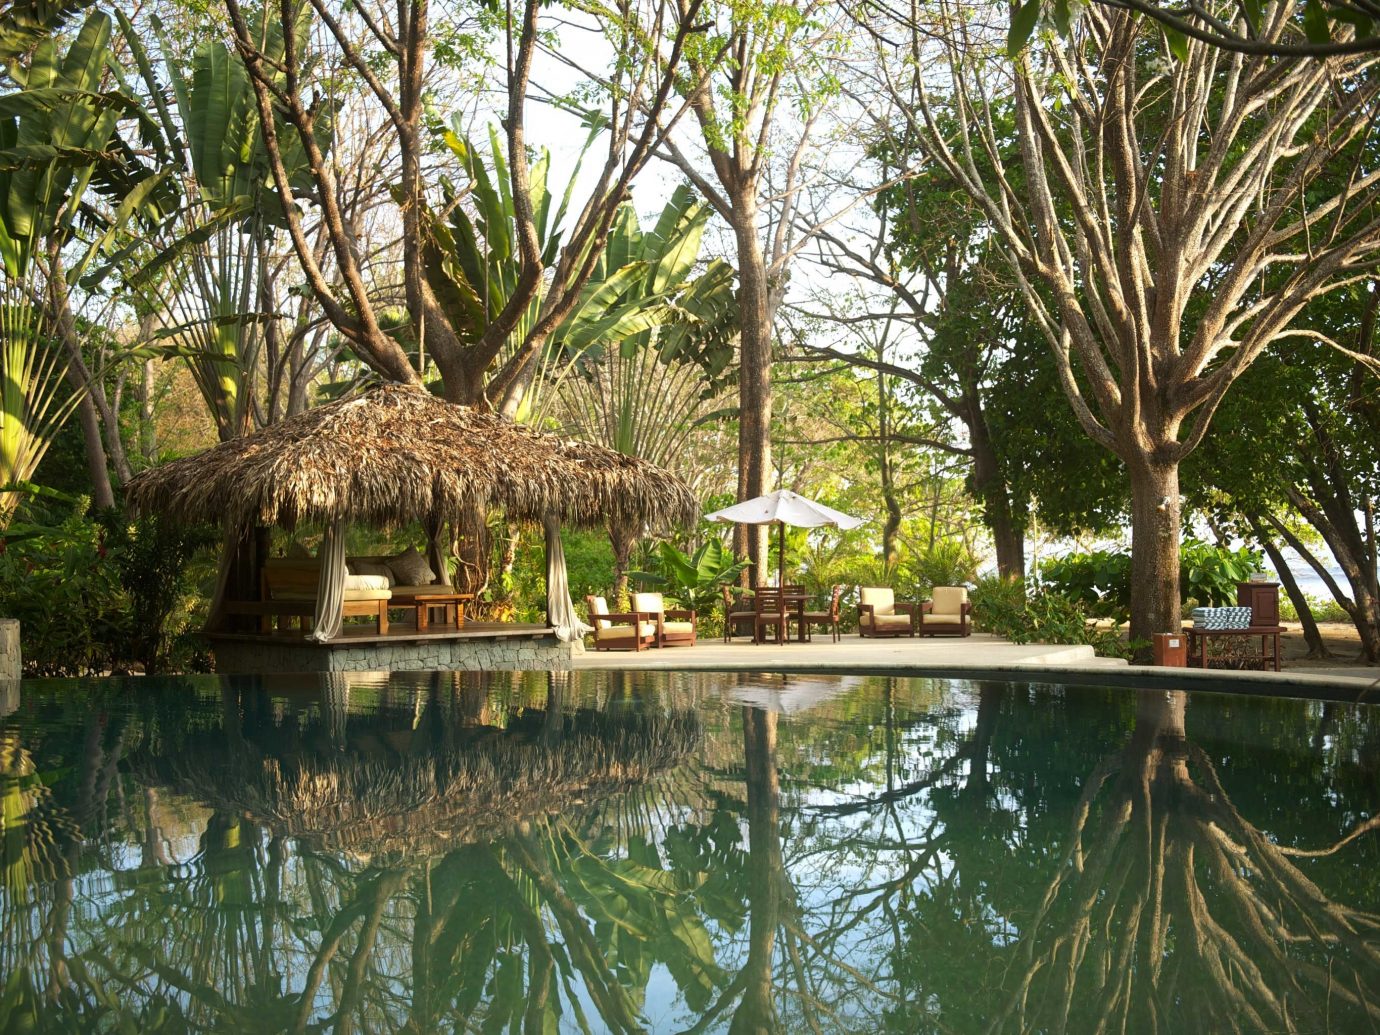 Swimming Pool At Florblanca In Costa Rica